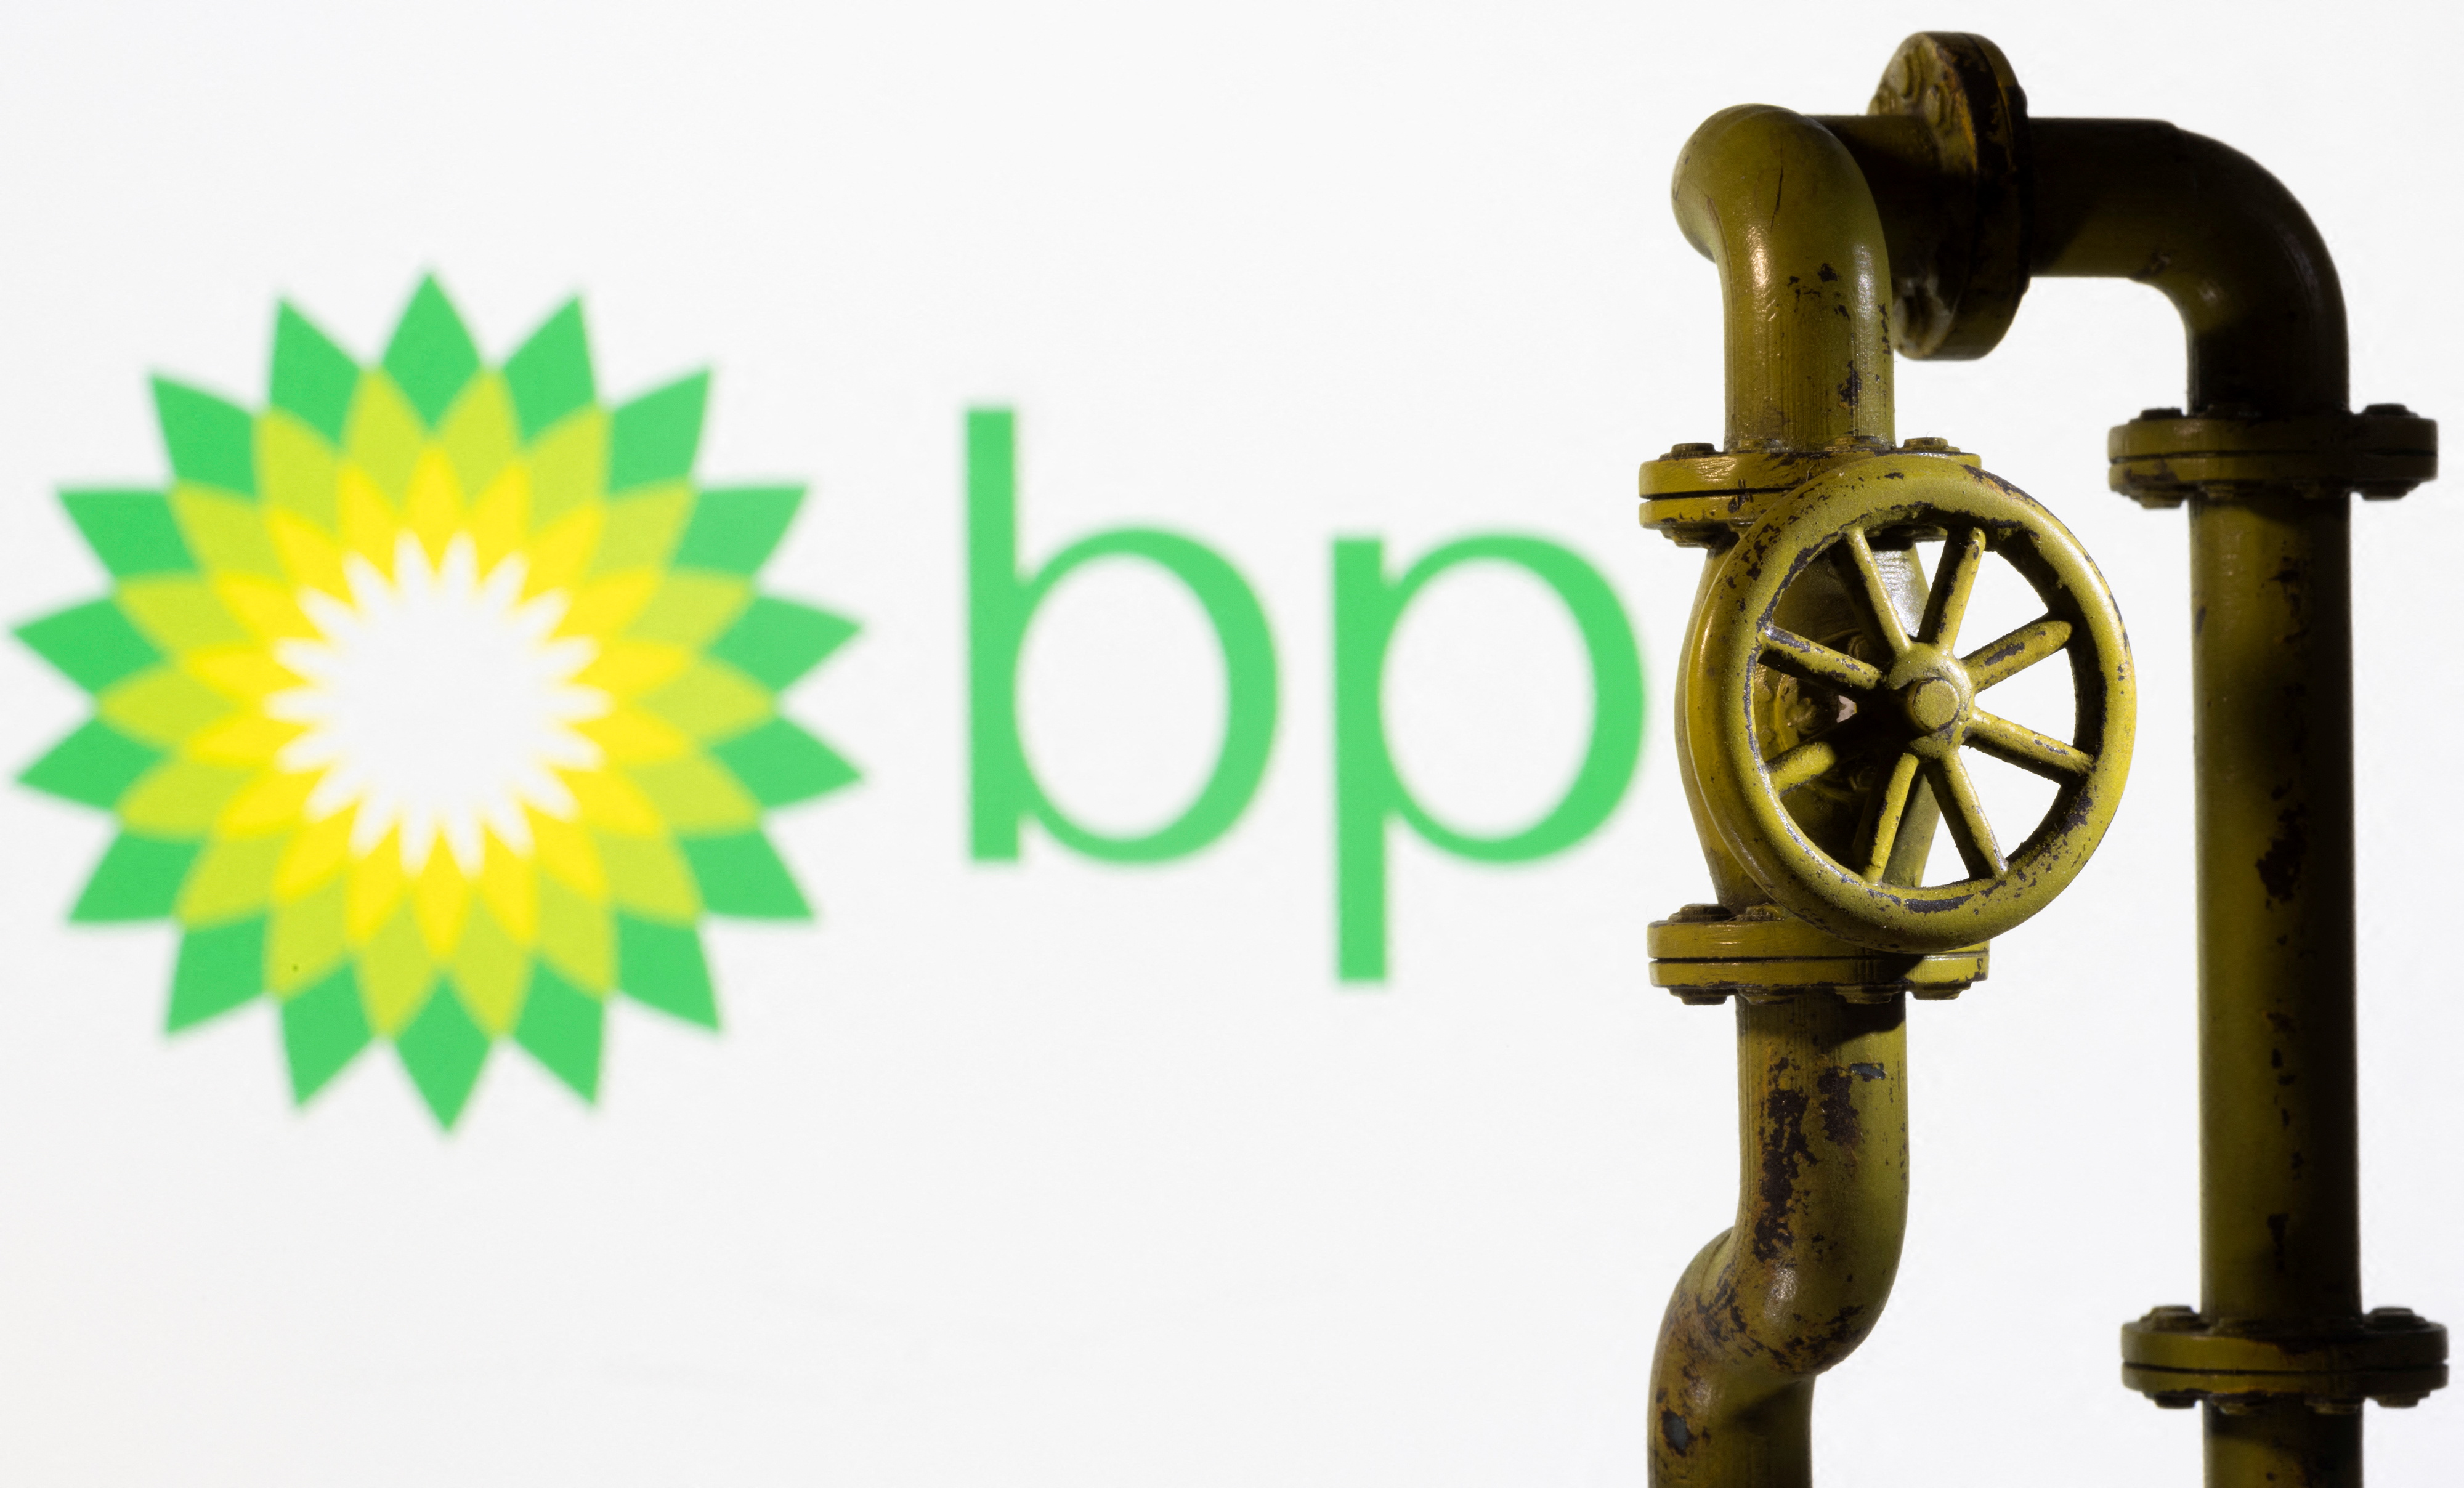 Illustration shows BP logo and natural gas pipeline